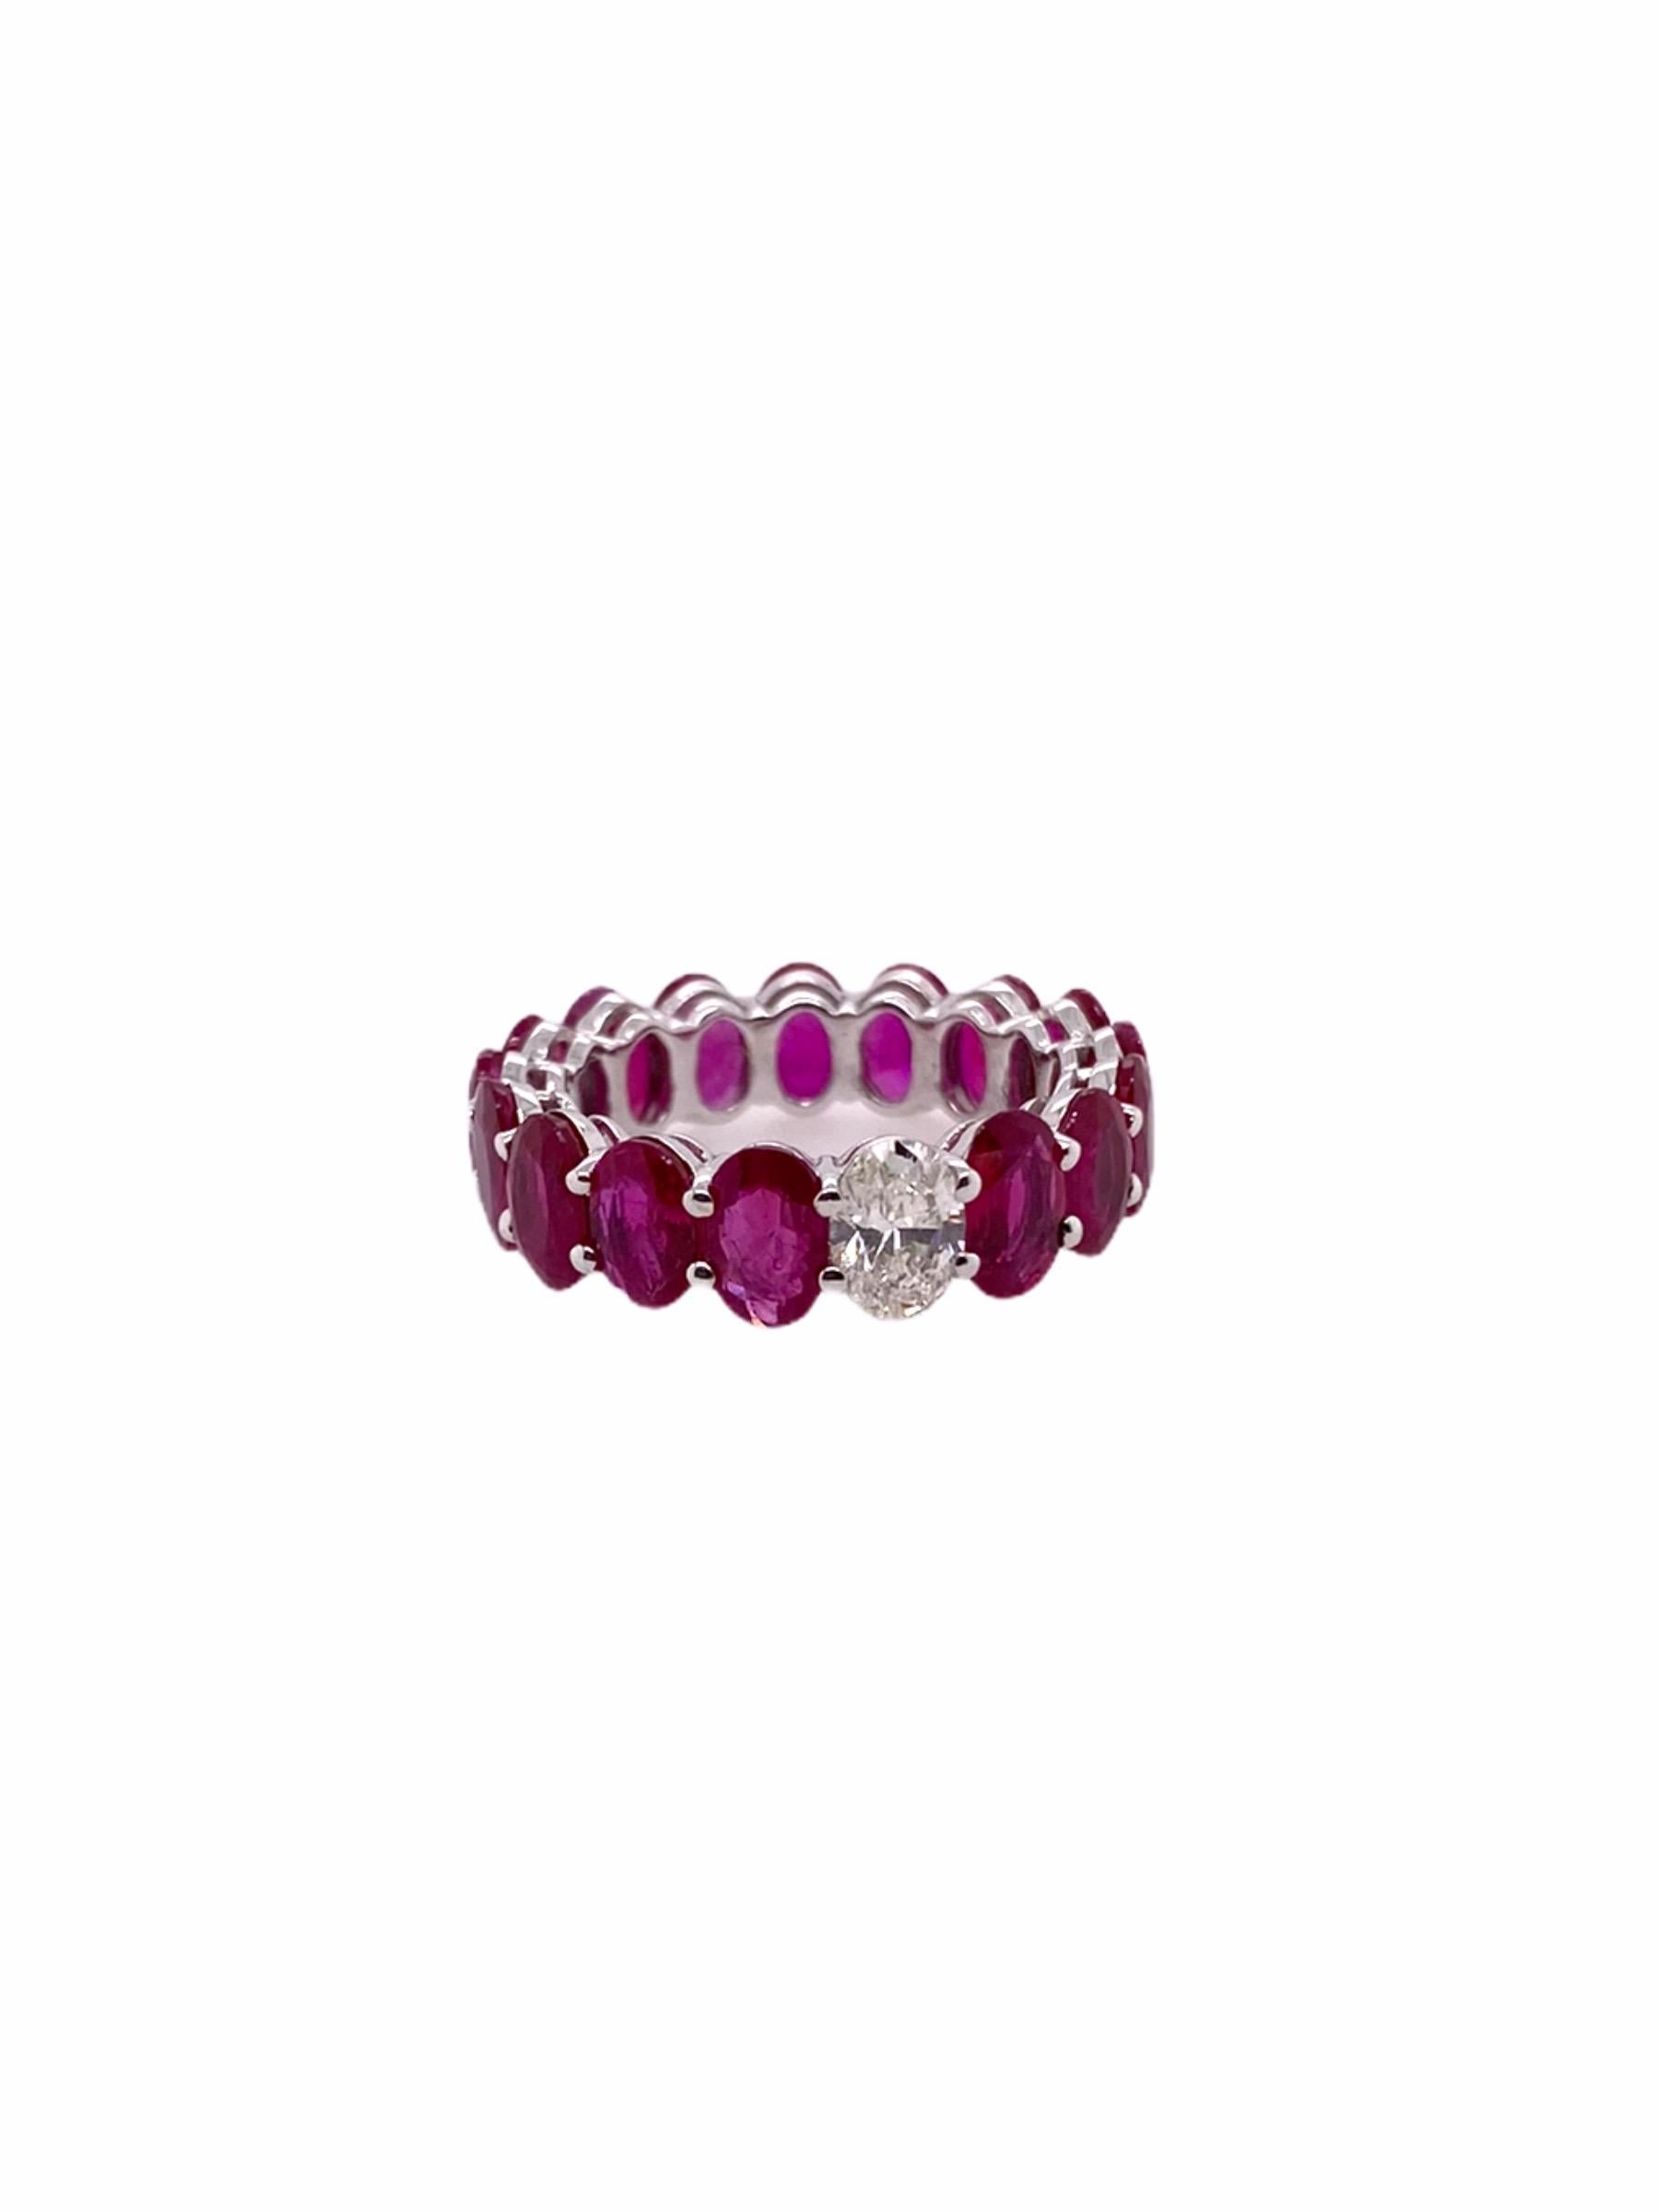 PARIS Craft House one-of-one Ruby Diamond Eternity Ring. Sitting tightly under the 18 Karat White Gold prongs are 16 lustrous Oval-cut Rubies in matching size, cuts and color weighing 8.20ct hand picked by the house. In contrast of their color, the